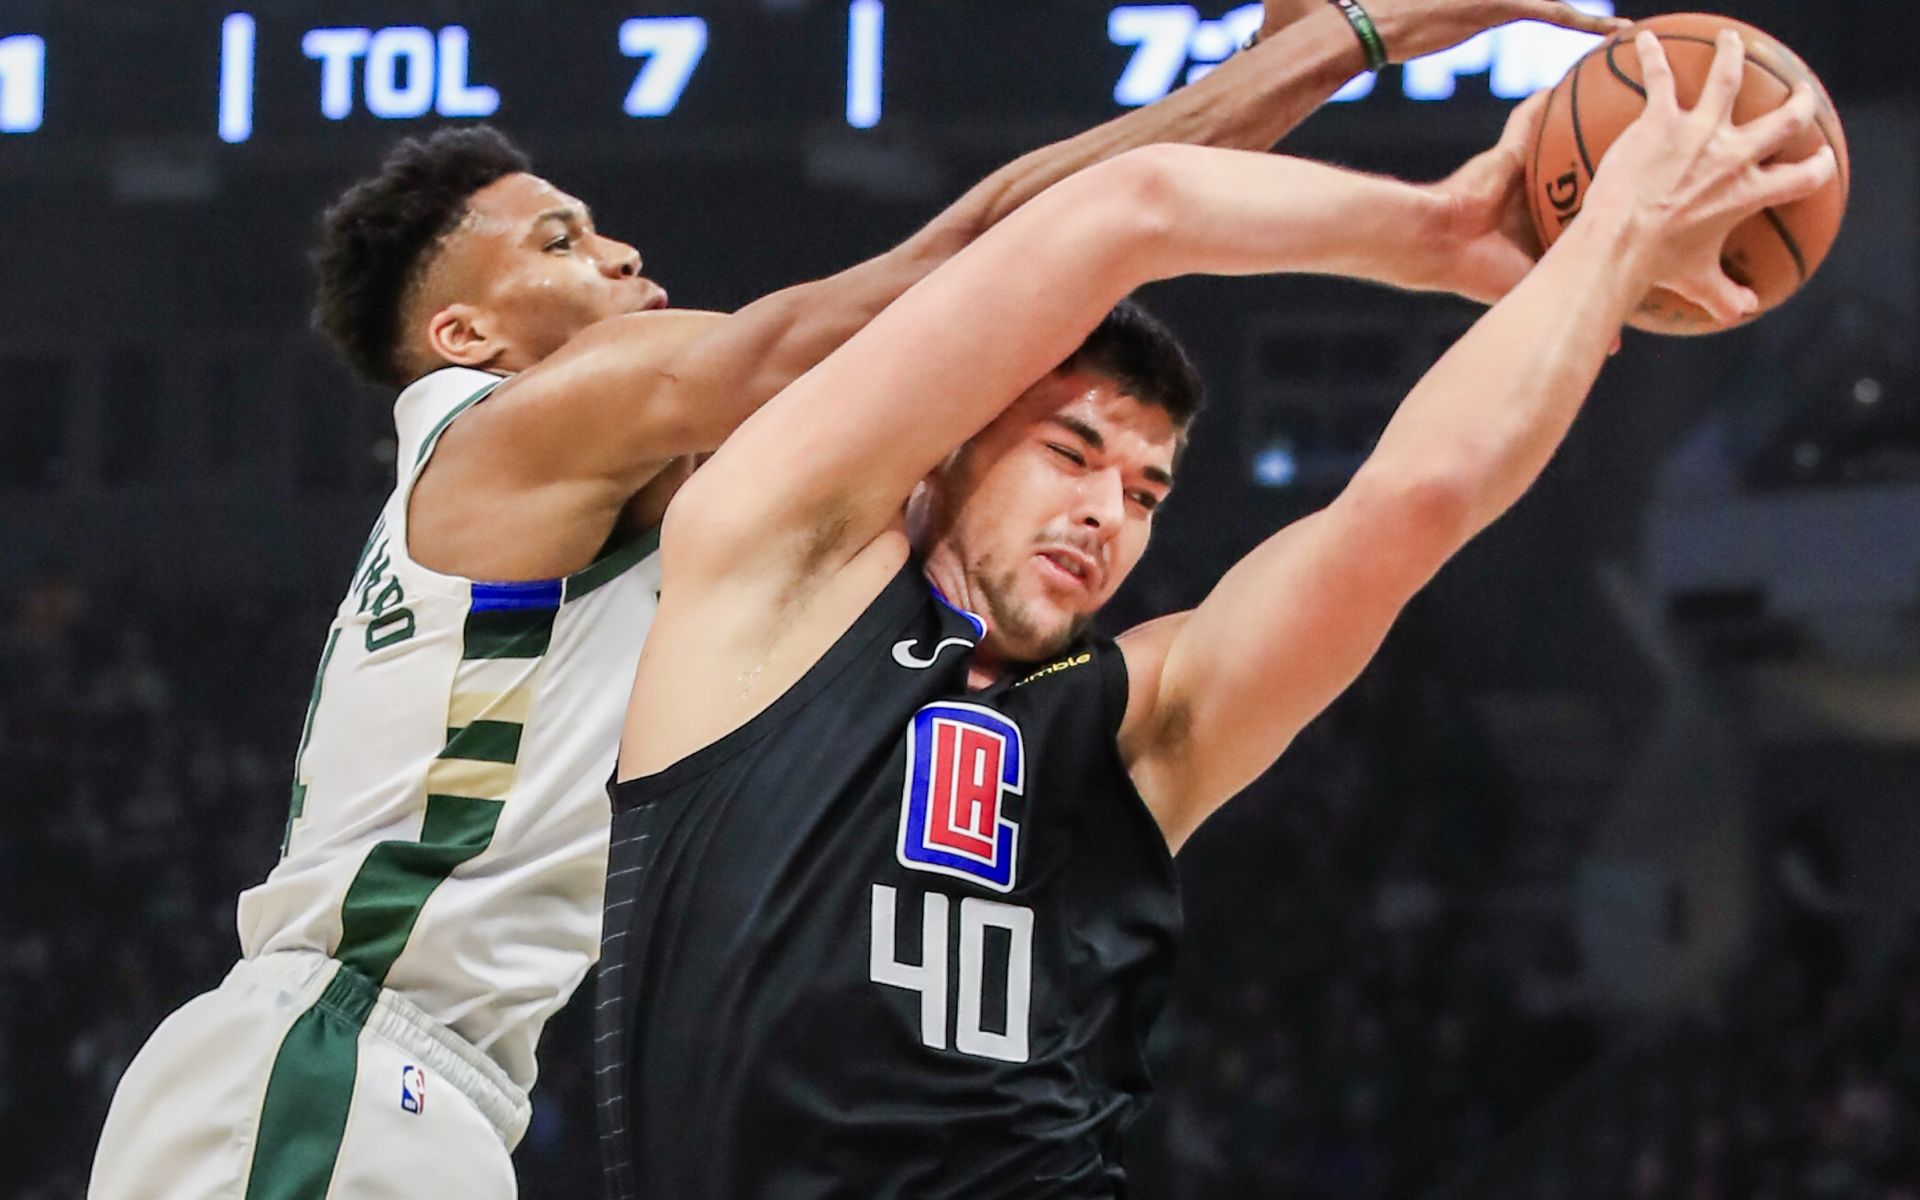 epa07469884 Los Angeles Clippers center Ivica Zubac of Croatia(R) and Milwaukee Bucks forward Giannis Antetokounmpo of Greece (L) battle for a rebound during the NBA game between the Los Angeles Clippers and the Milwaukee Bucks at Fiserv Forum in Milwaukee, Wisconsin, USA, 28 March 2019.  EPA/TANNEN MAURY SHUTTERSTOCK OUT